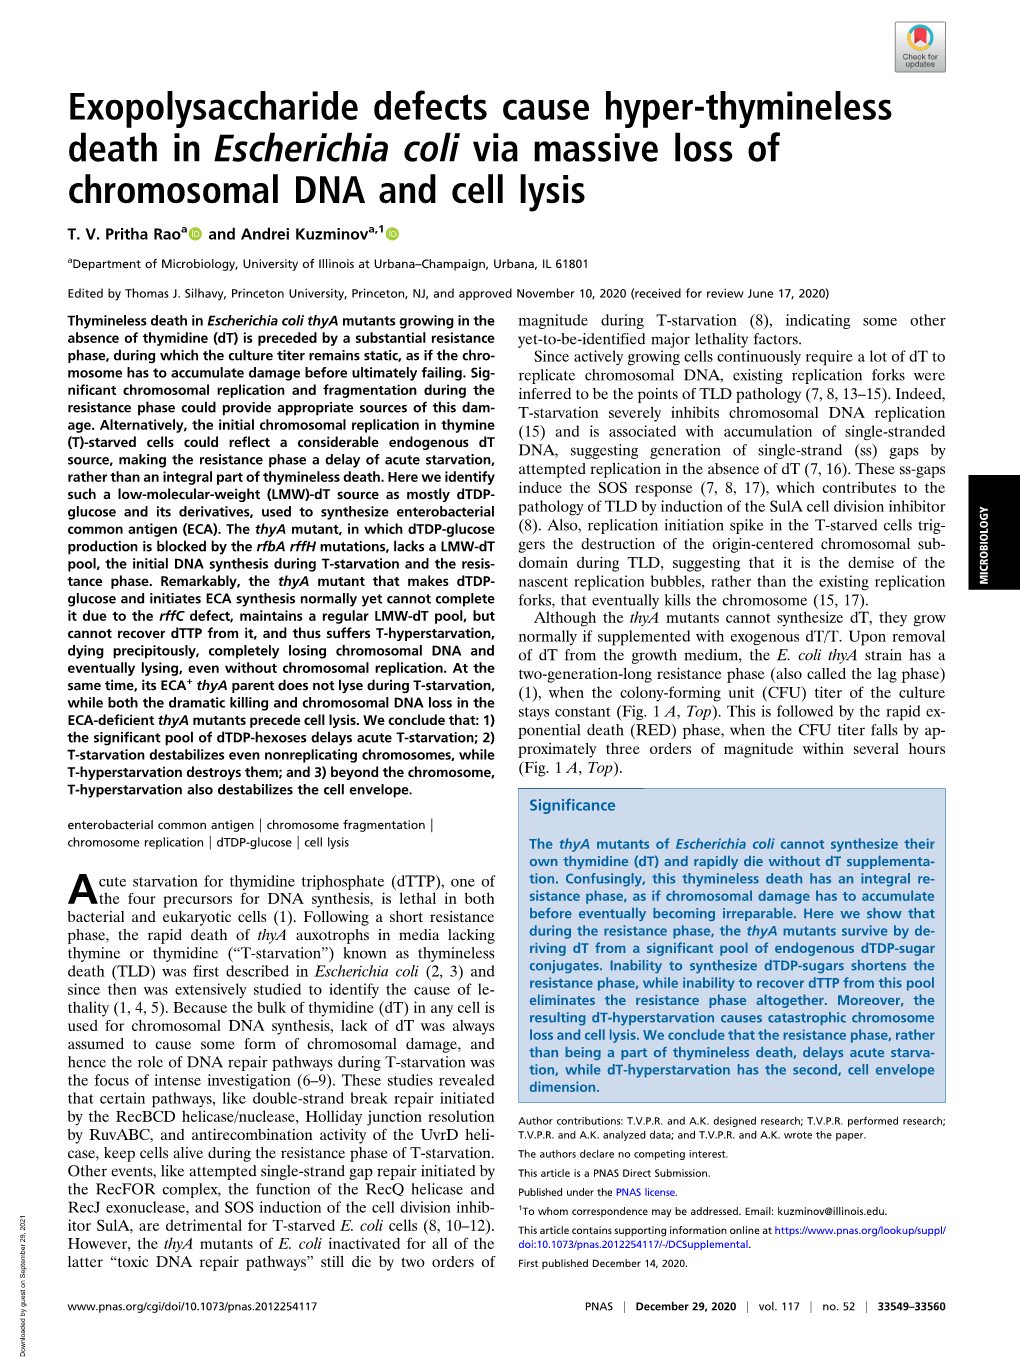 Exopolysaccharide Defects Cause Hyper-Thymineless Death in Escherichia Coli Via Massive Loss of Chromosomal DNA and Cell Lysis